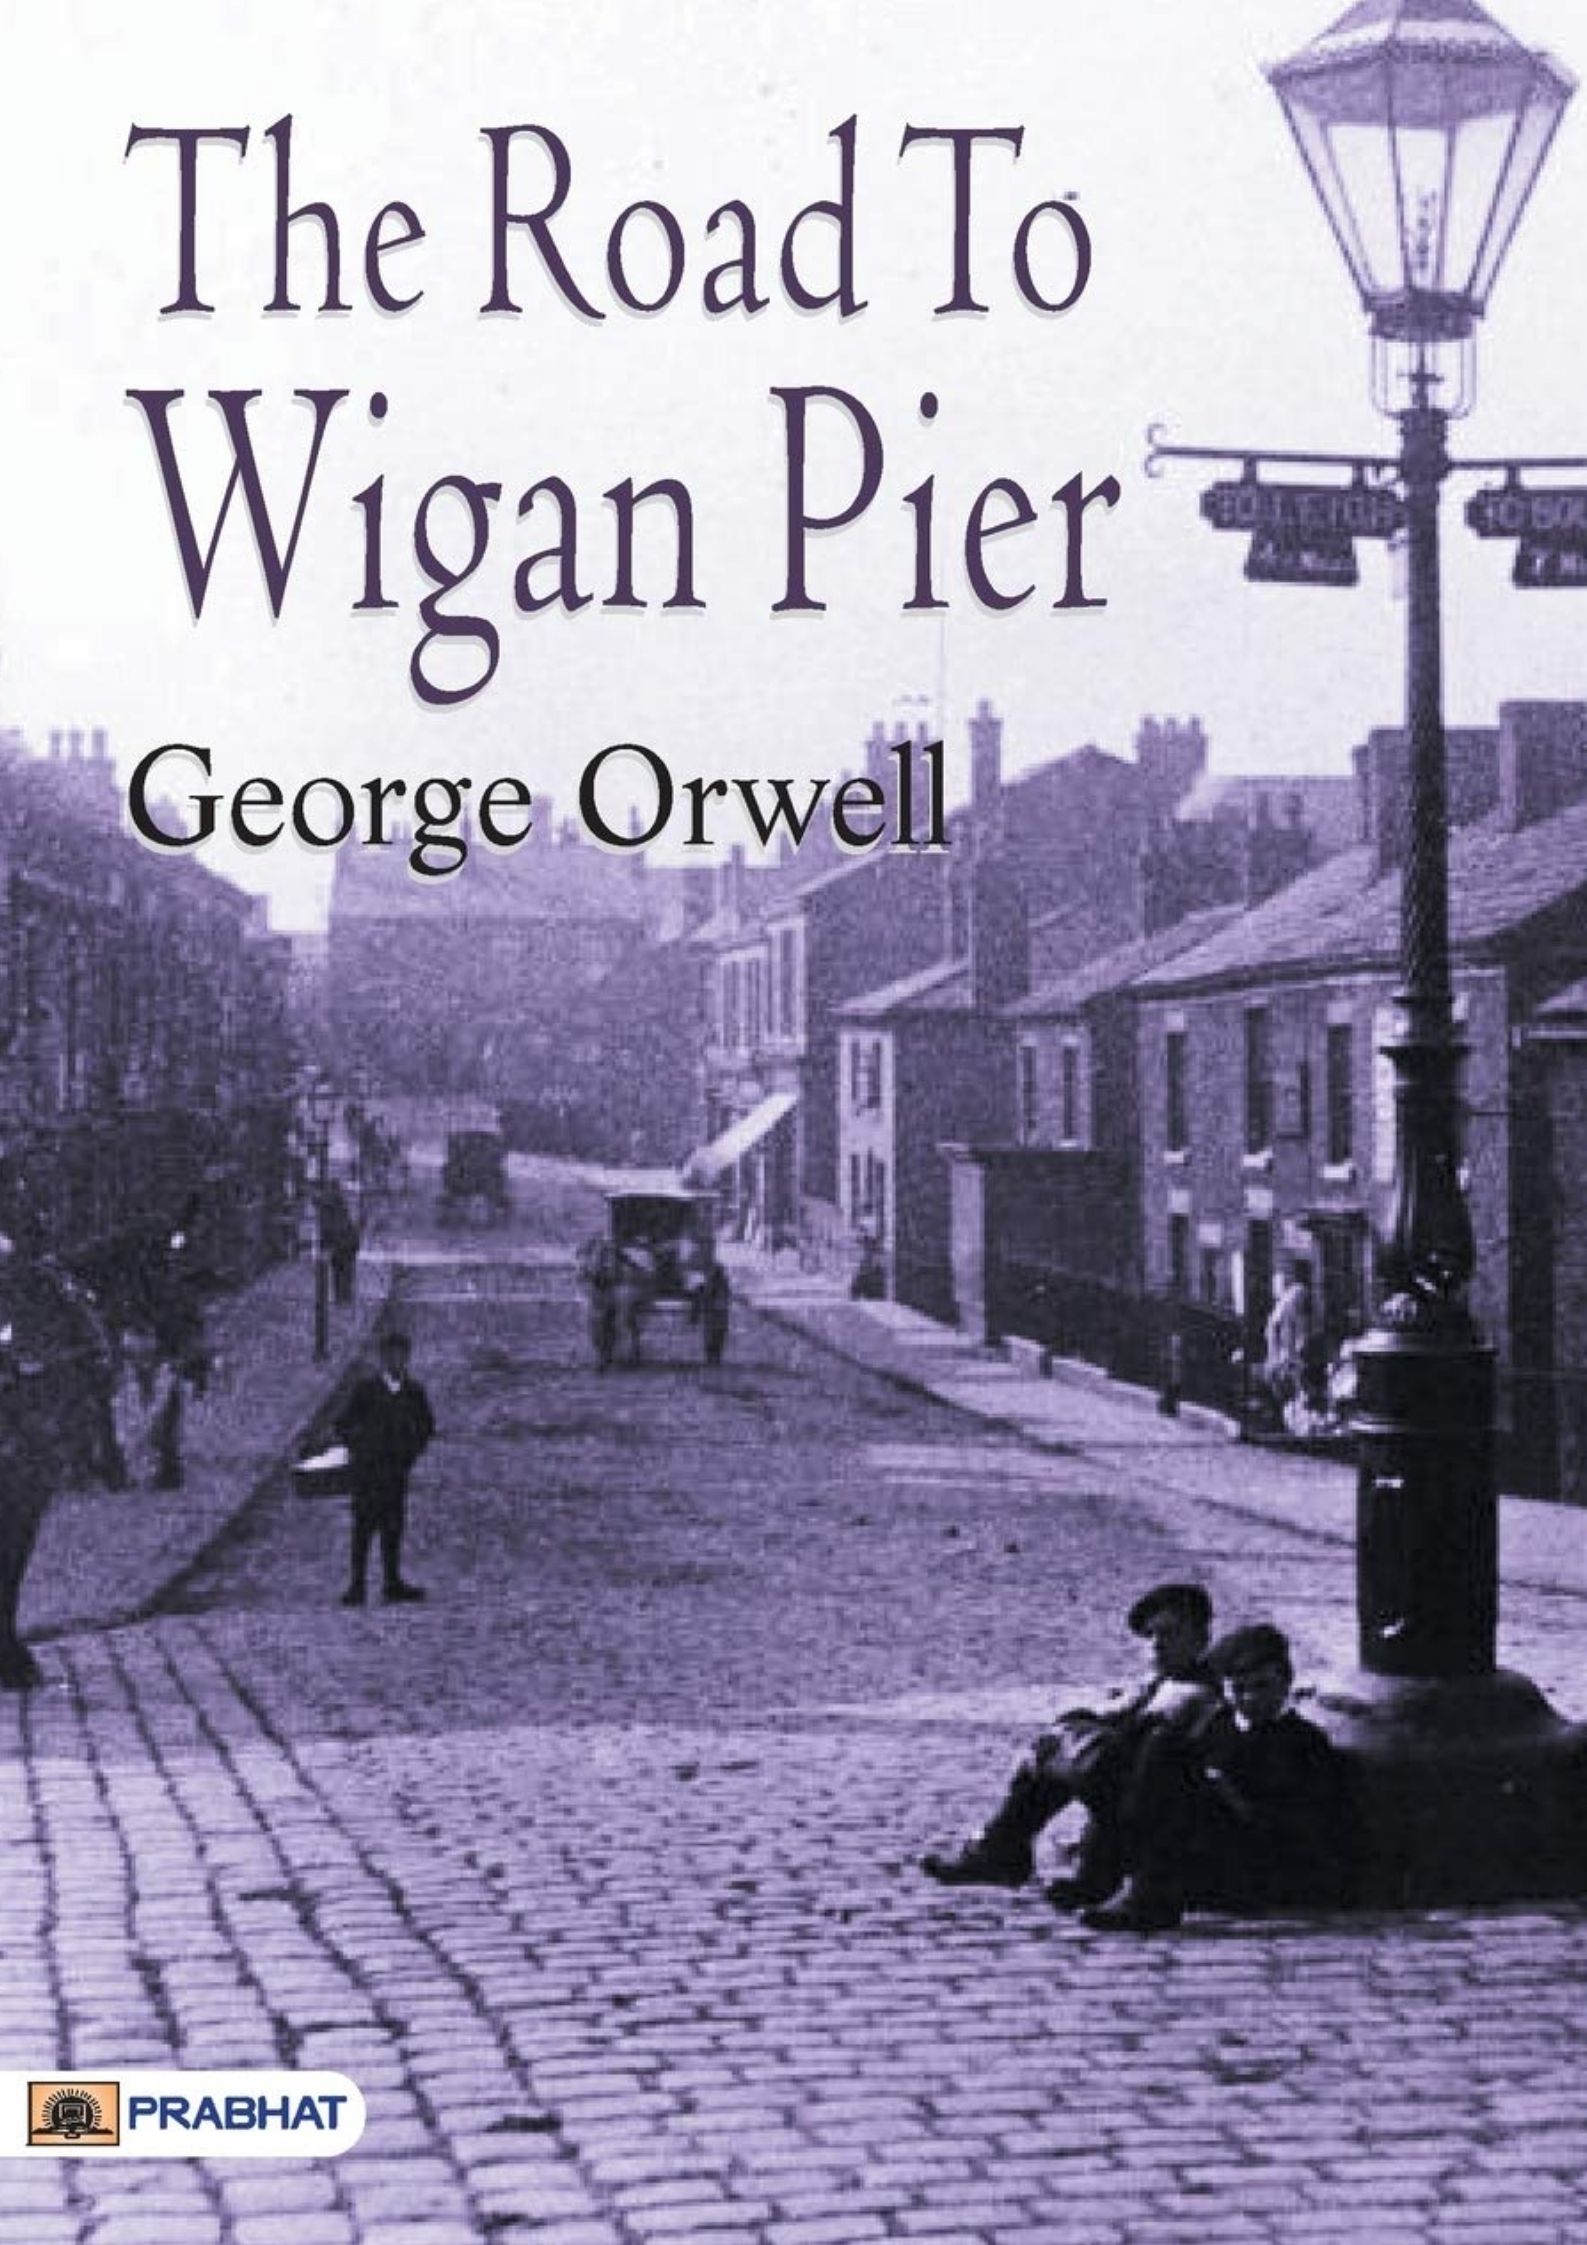 The Road to Wigan Pier by George Orwell